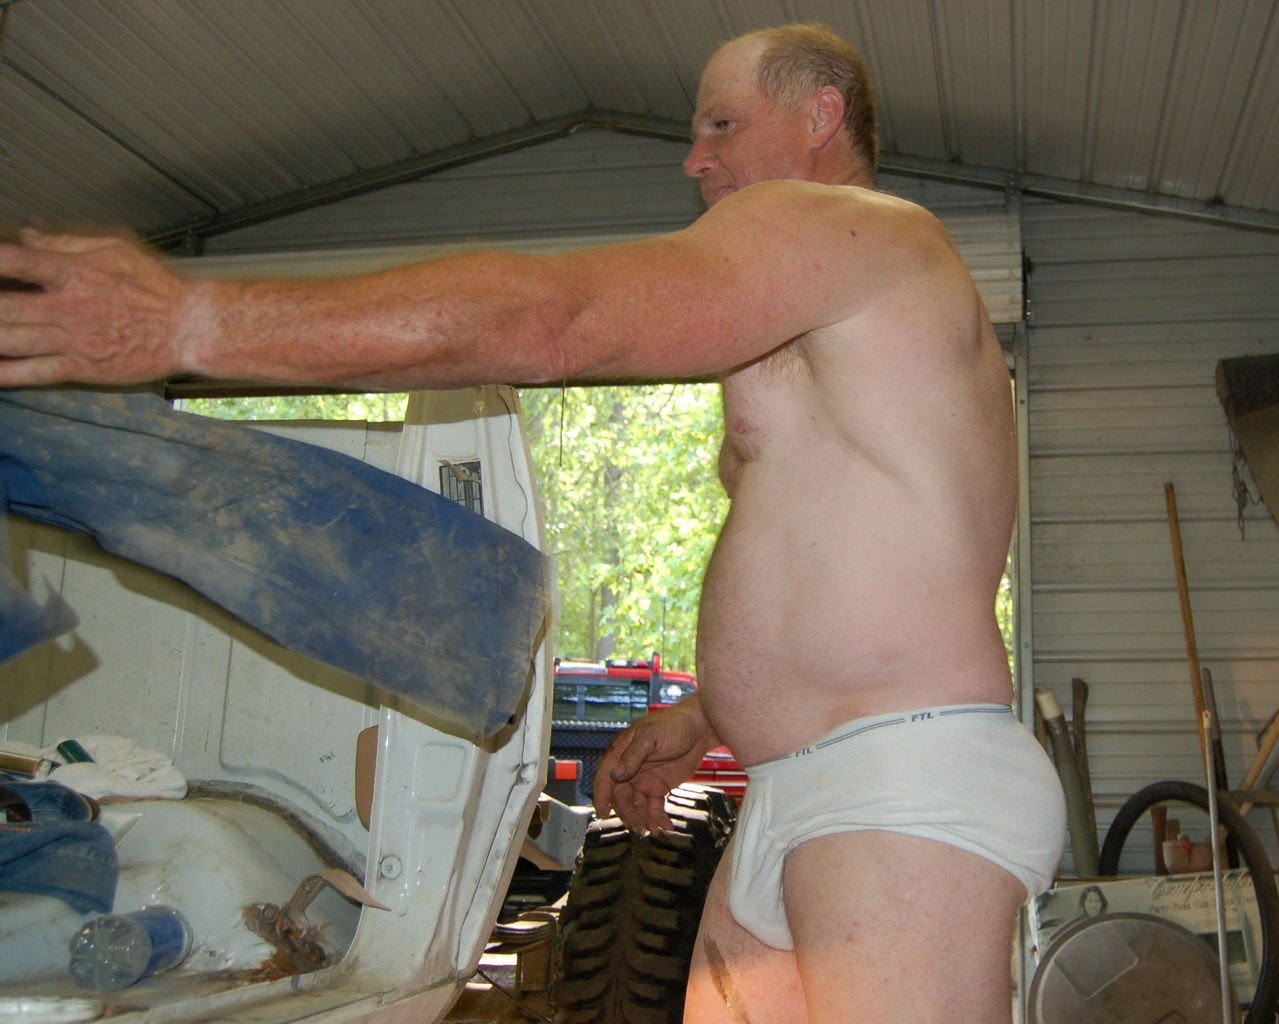 Watch the Photo by Hairy Musclebears with the username @hairymusclebears, posted on July 27, 2019. The post is about the topic Musclebear Daddy. and the text says 'Cowboy Daddy Working Nude from USAFUR.com personals  #graychesthair #gayredneck #gaycountryboy #gaycountrypup #redneckpup #bear #beargay #bearstyle #Hairybear #picsbybears #GayDaddy #Instagay #GayChub #GayCub #hairybelly #BearPhotoADay #gaychubby..'